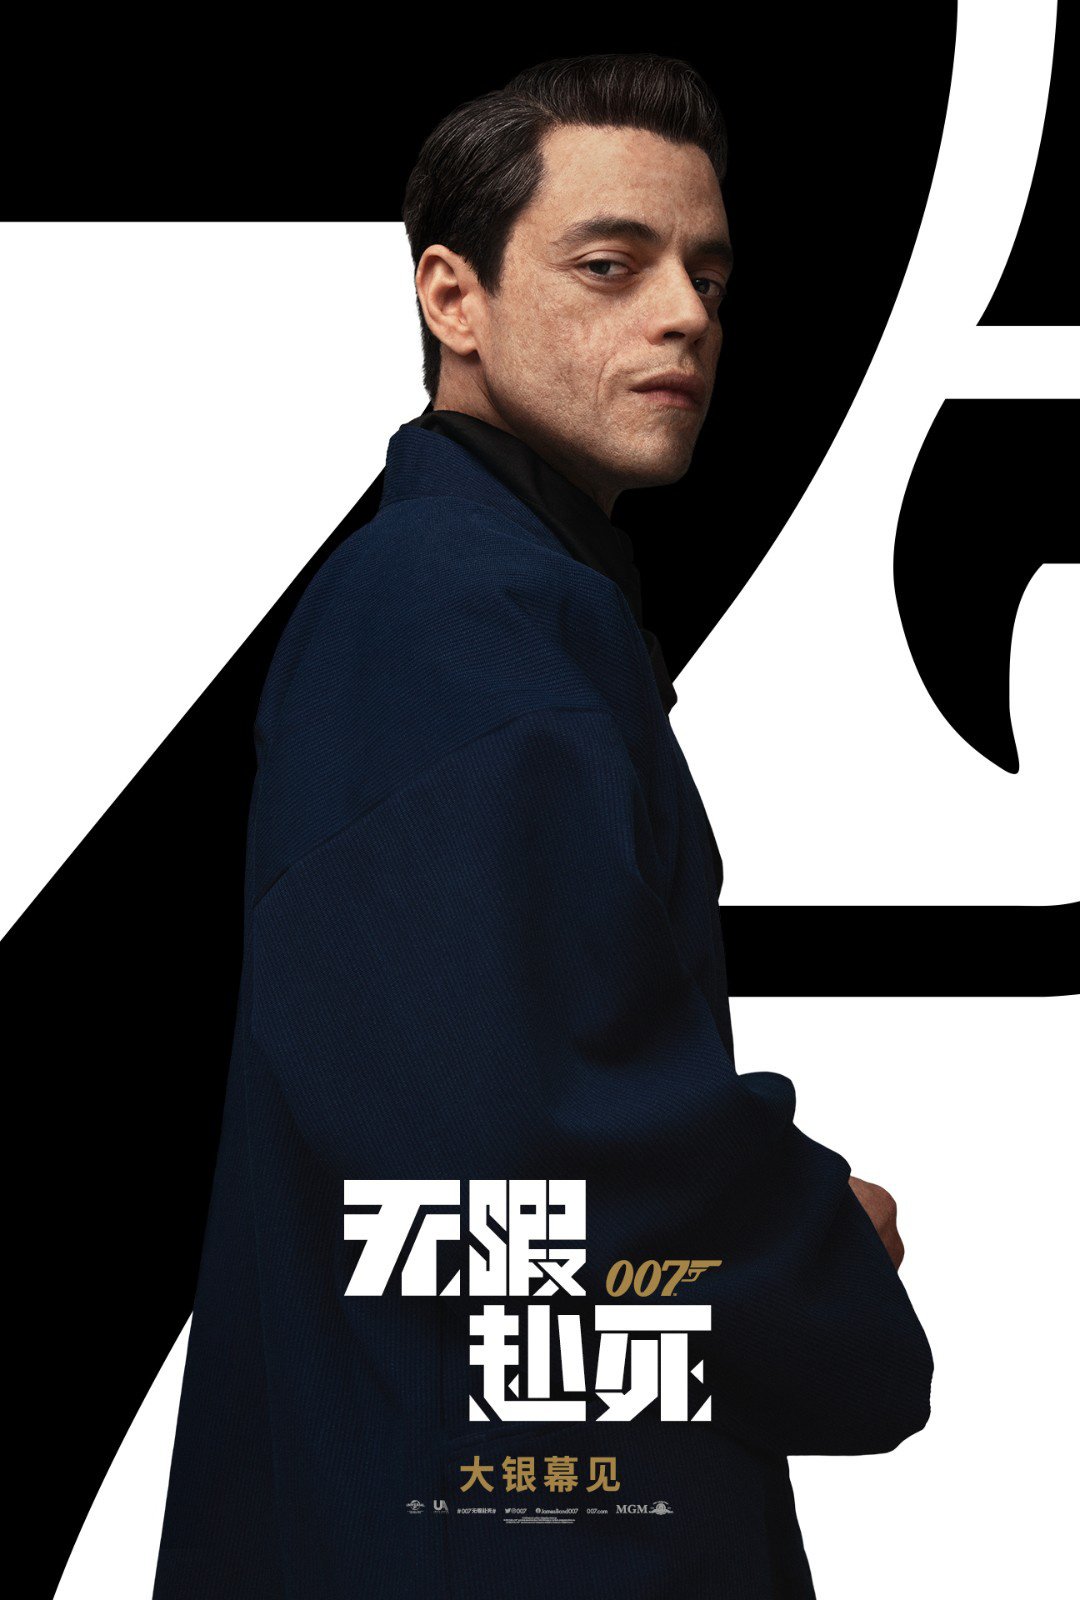 007 No Time to Die released the Chinese version of the character poster